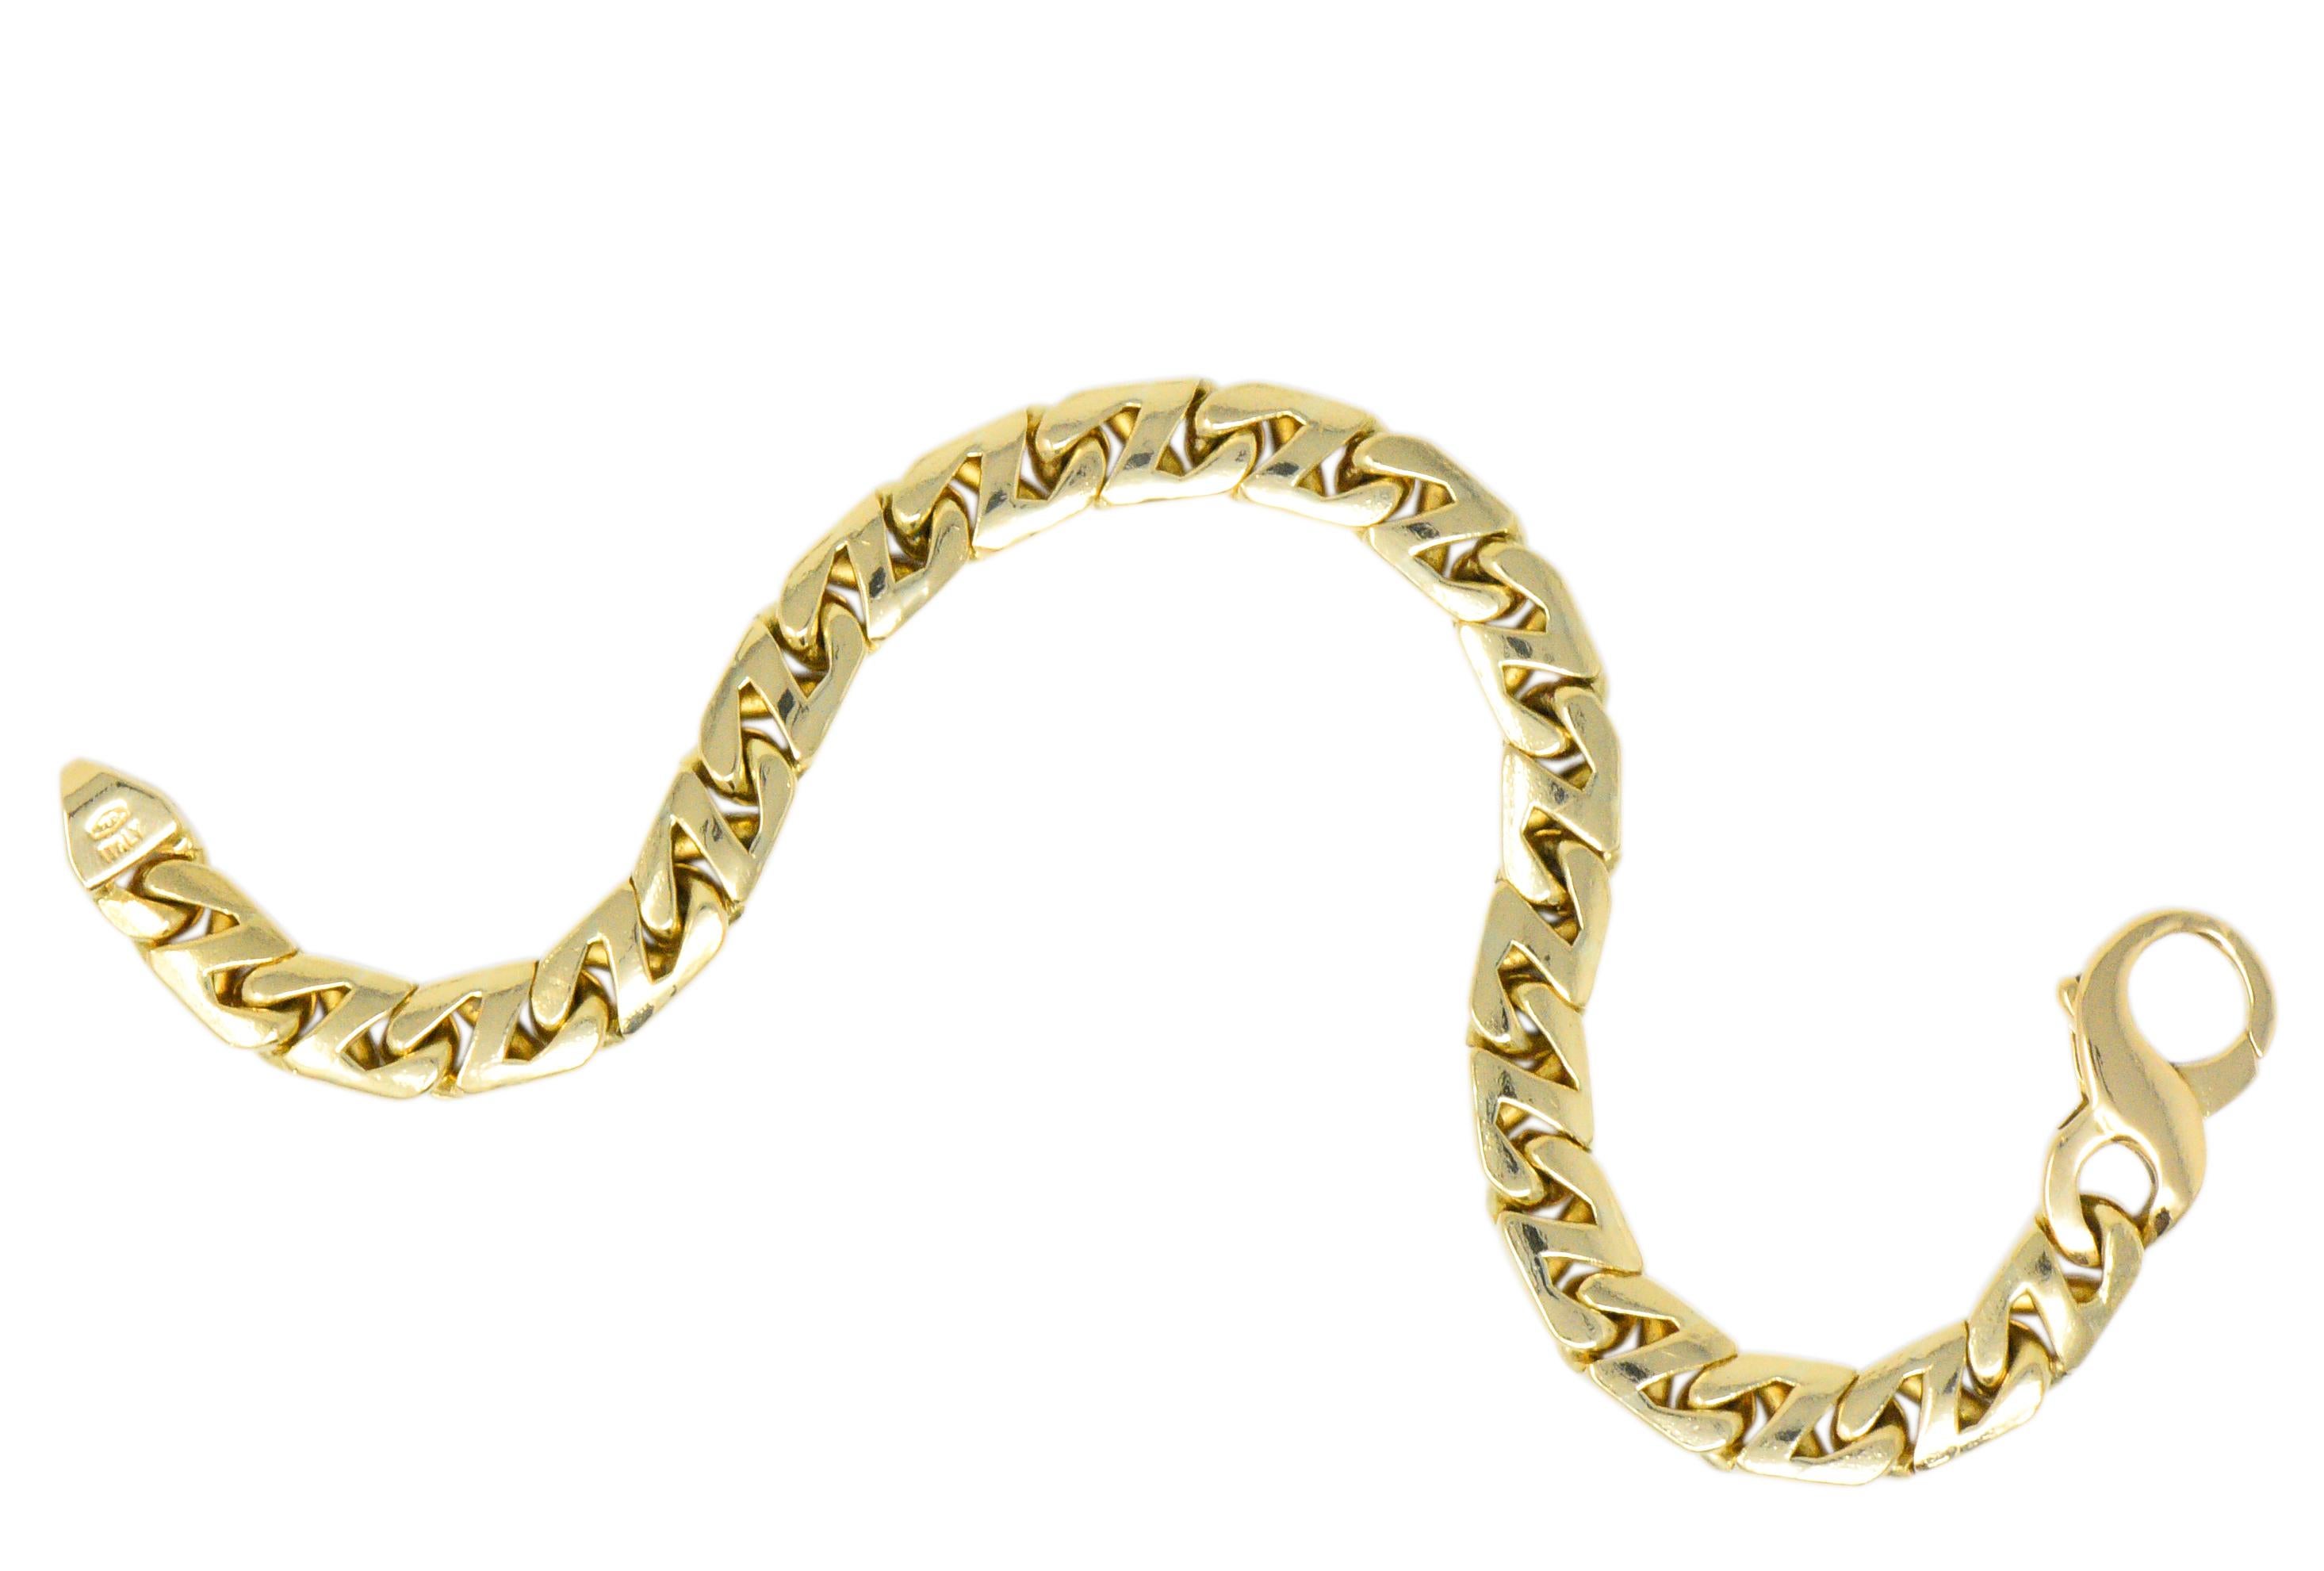 Cuban chain style link bracelet featuring a high polished finish

Completed by a stylized and oversized lobster clasp

Signed T & Co. Italy

Stamped 750 for 18 karat gold

Circa 1980

Length: 8 1/4 inches

Width: 5/16 inch

Total weight: 50.3